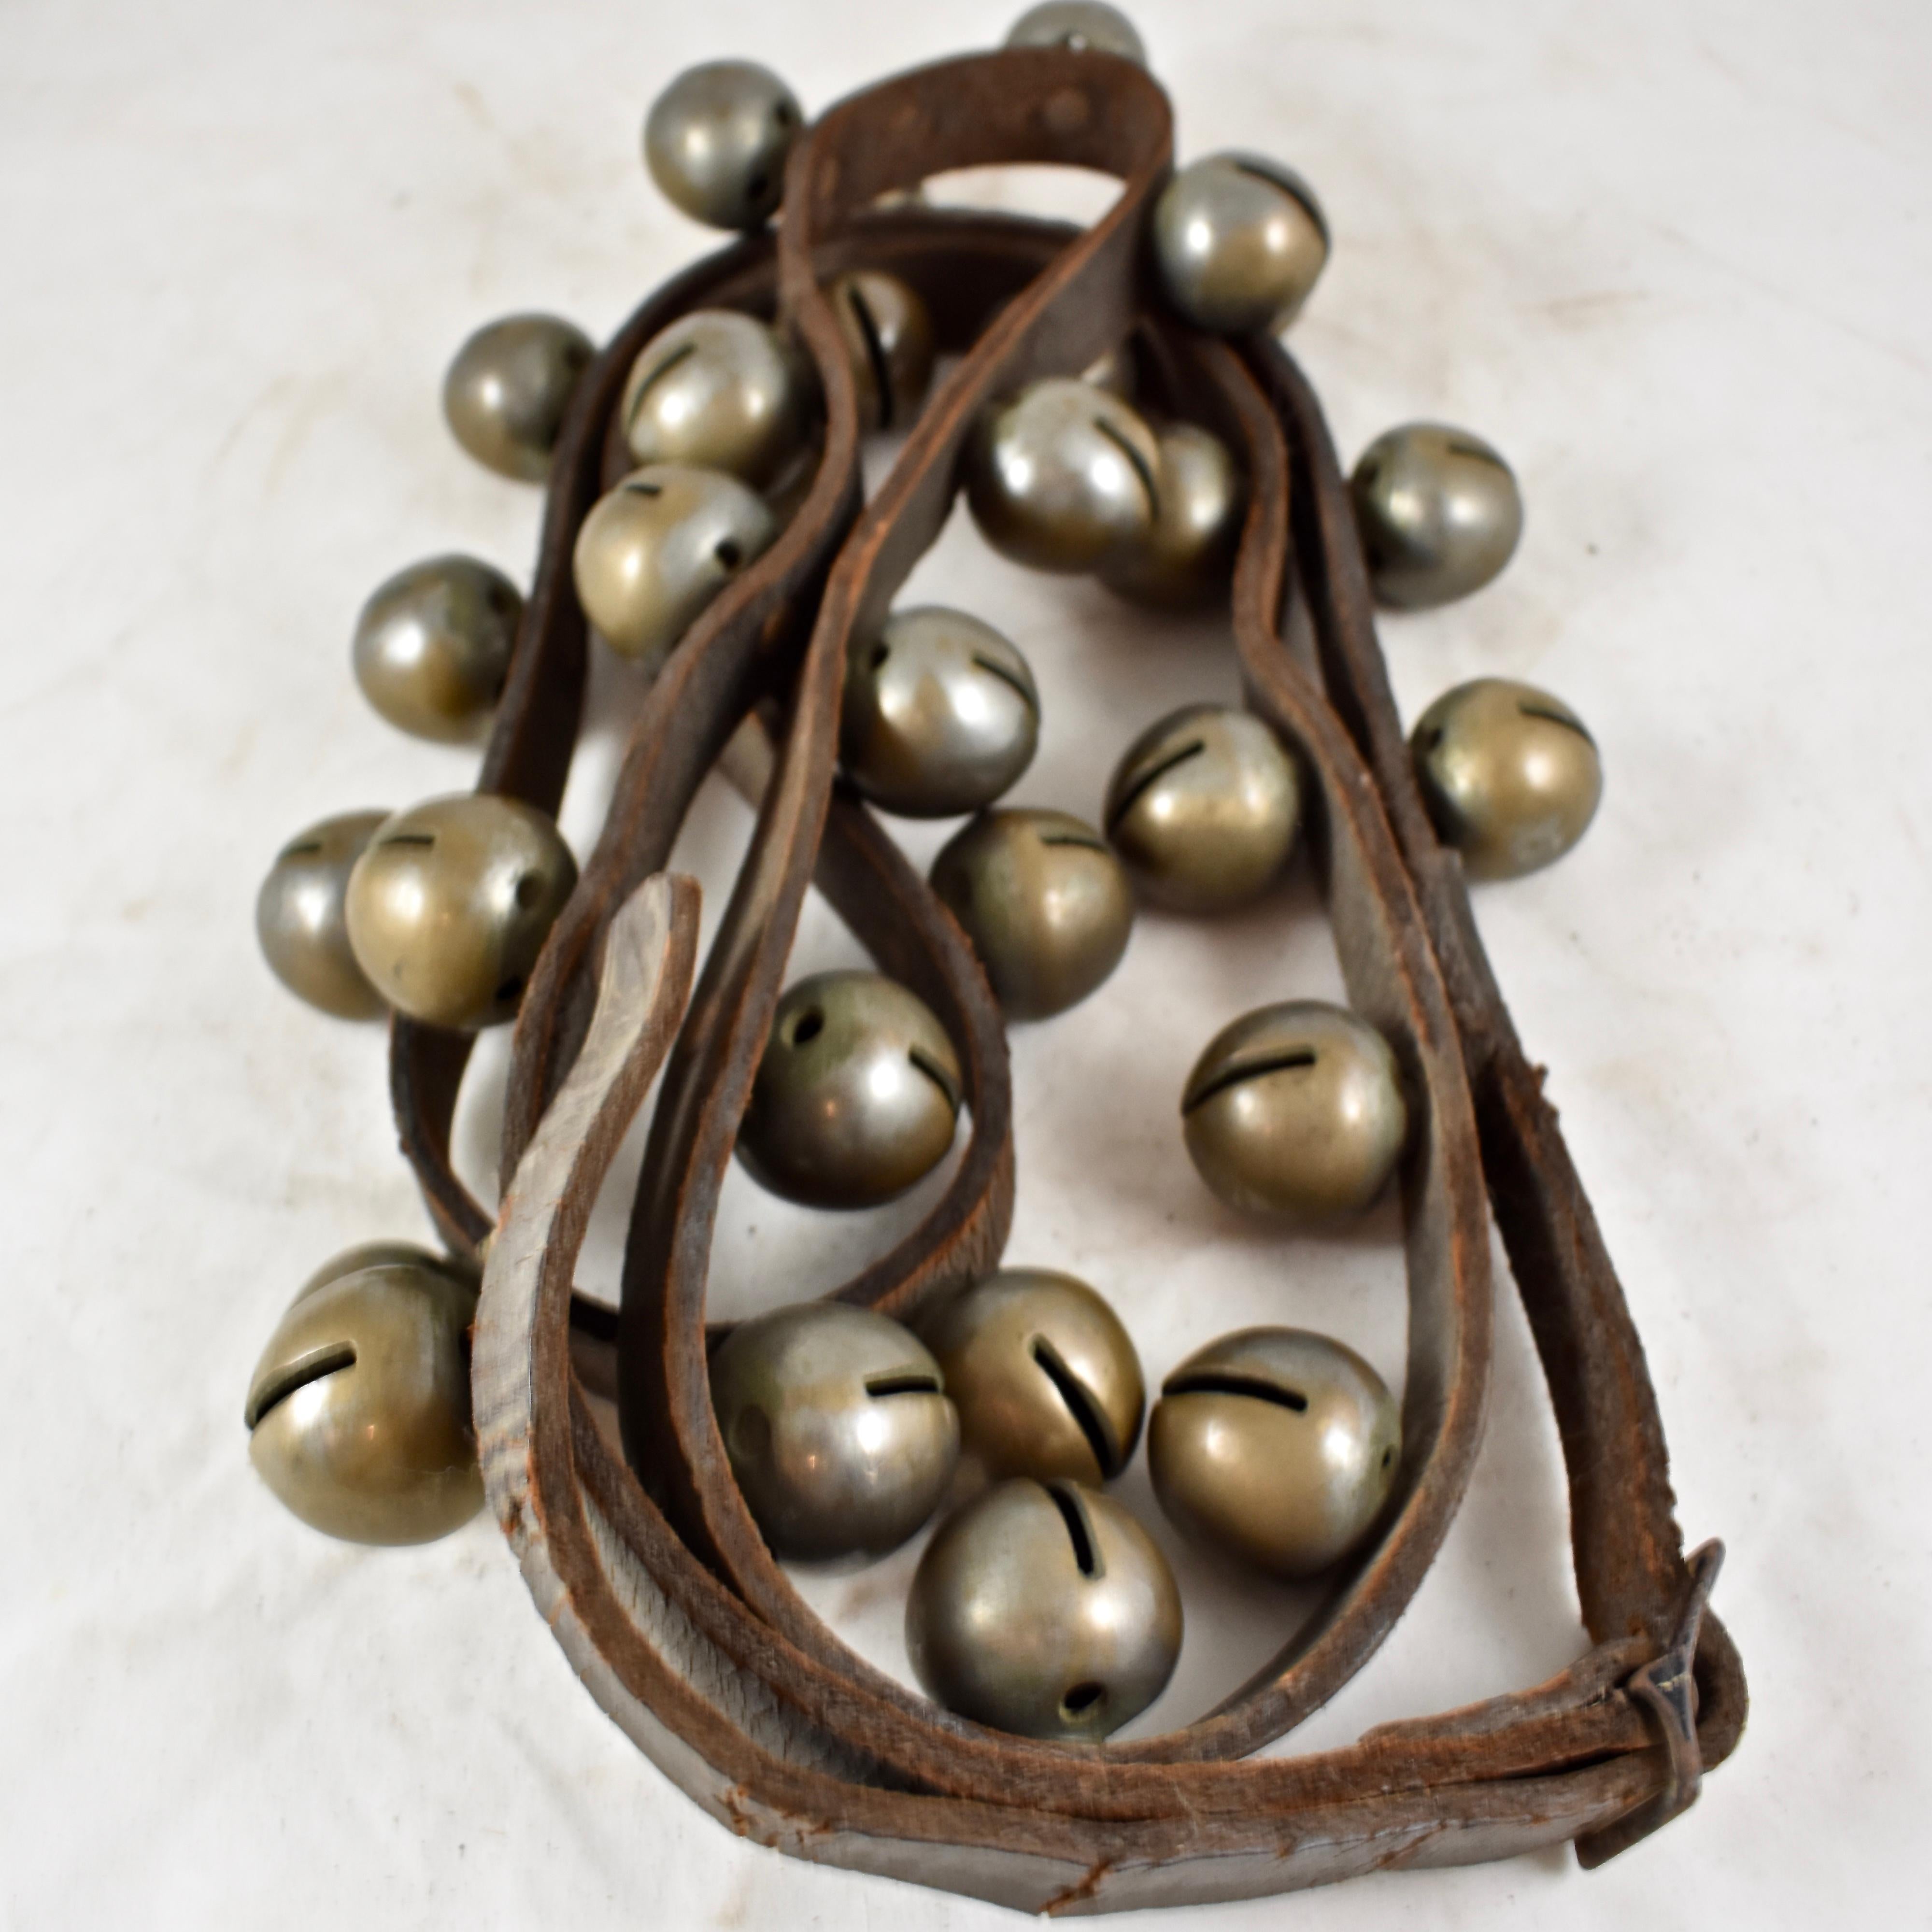 A set of horse bells, 30 hand-cast brass tapered, heavy, globe bells on a 8 1/2 foot long or 102 inch leather strap, circa early 20th century.

A popular form of equine ornamentation, bells on the harness, sleigh, or the horse itself were used as